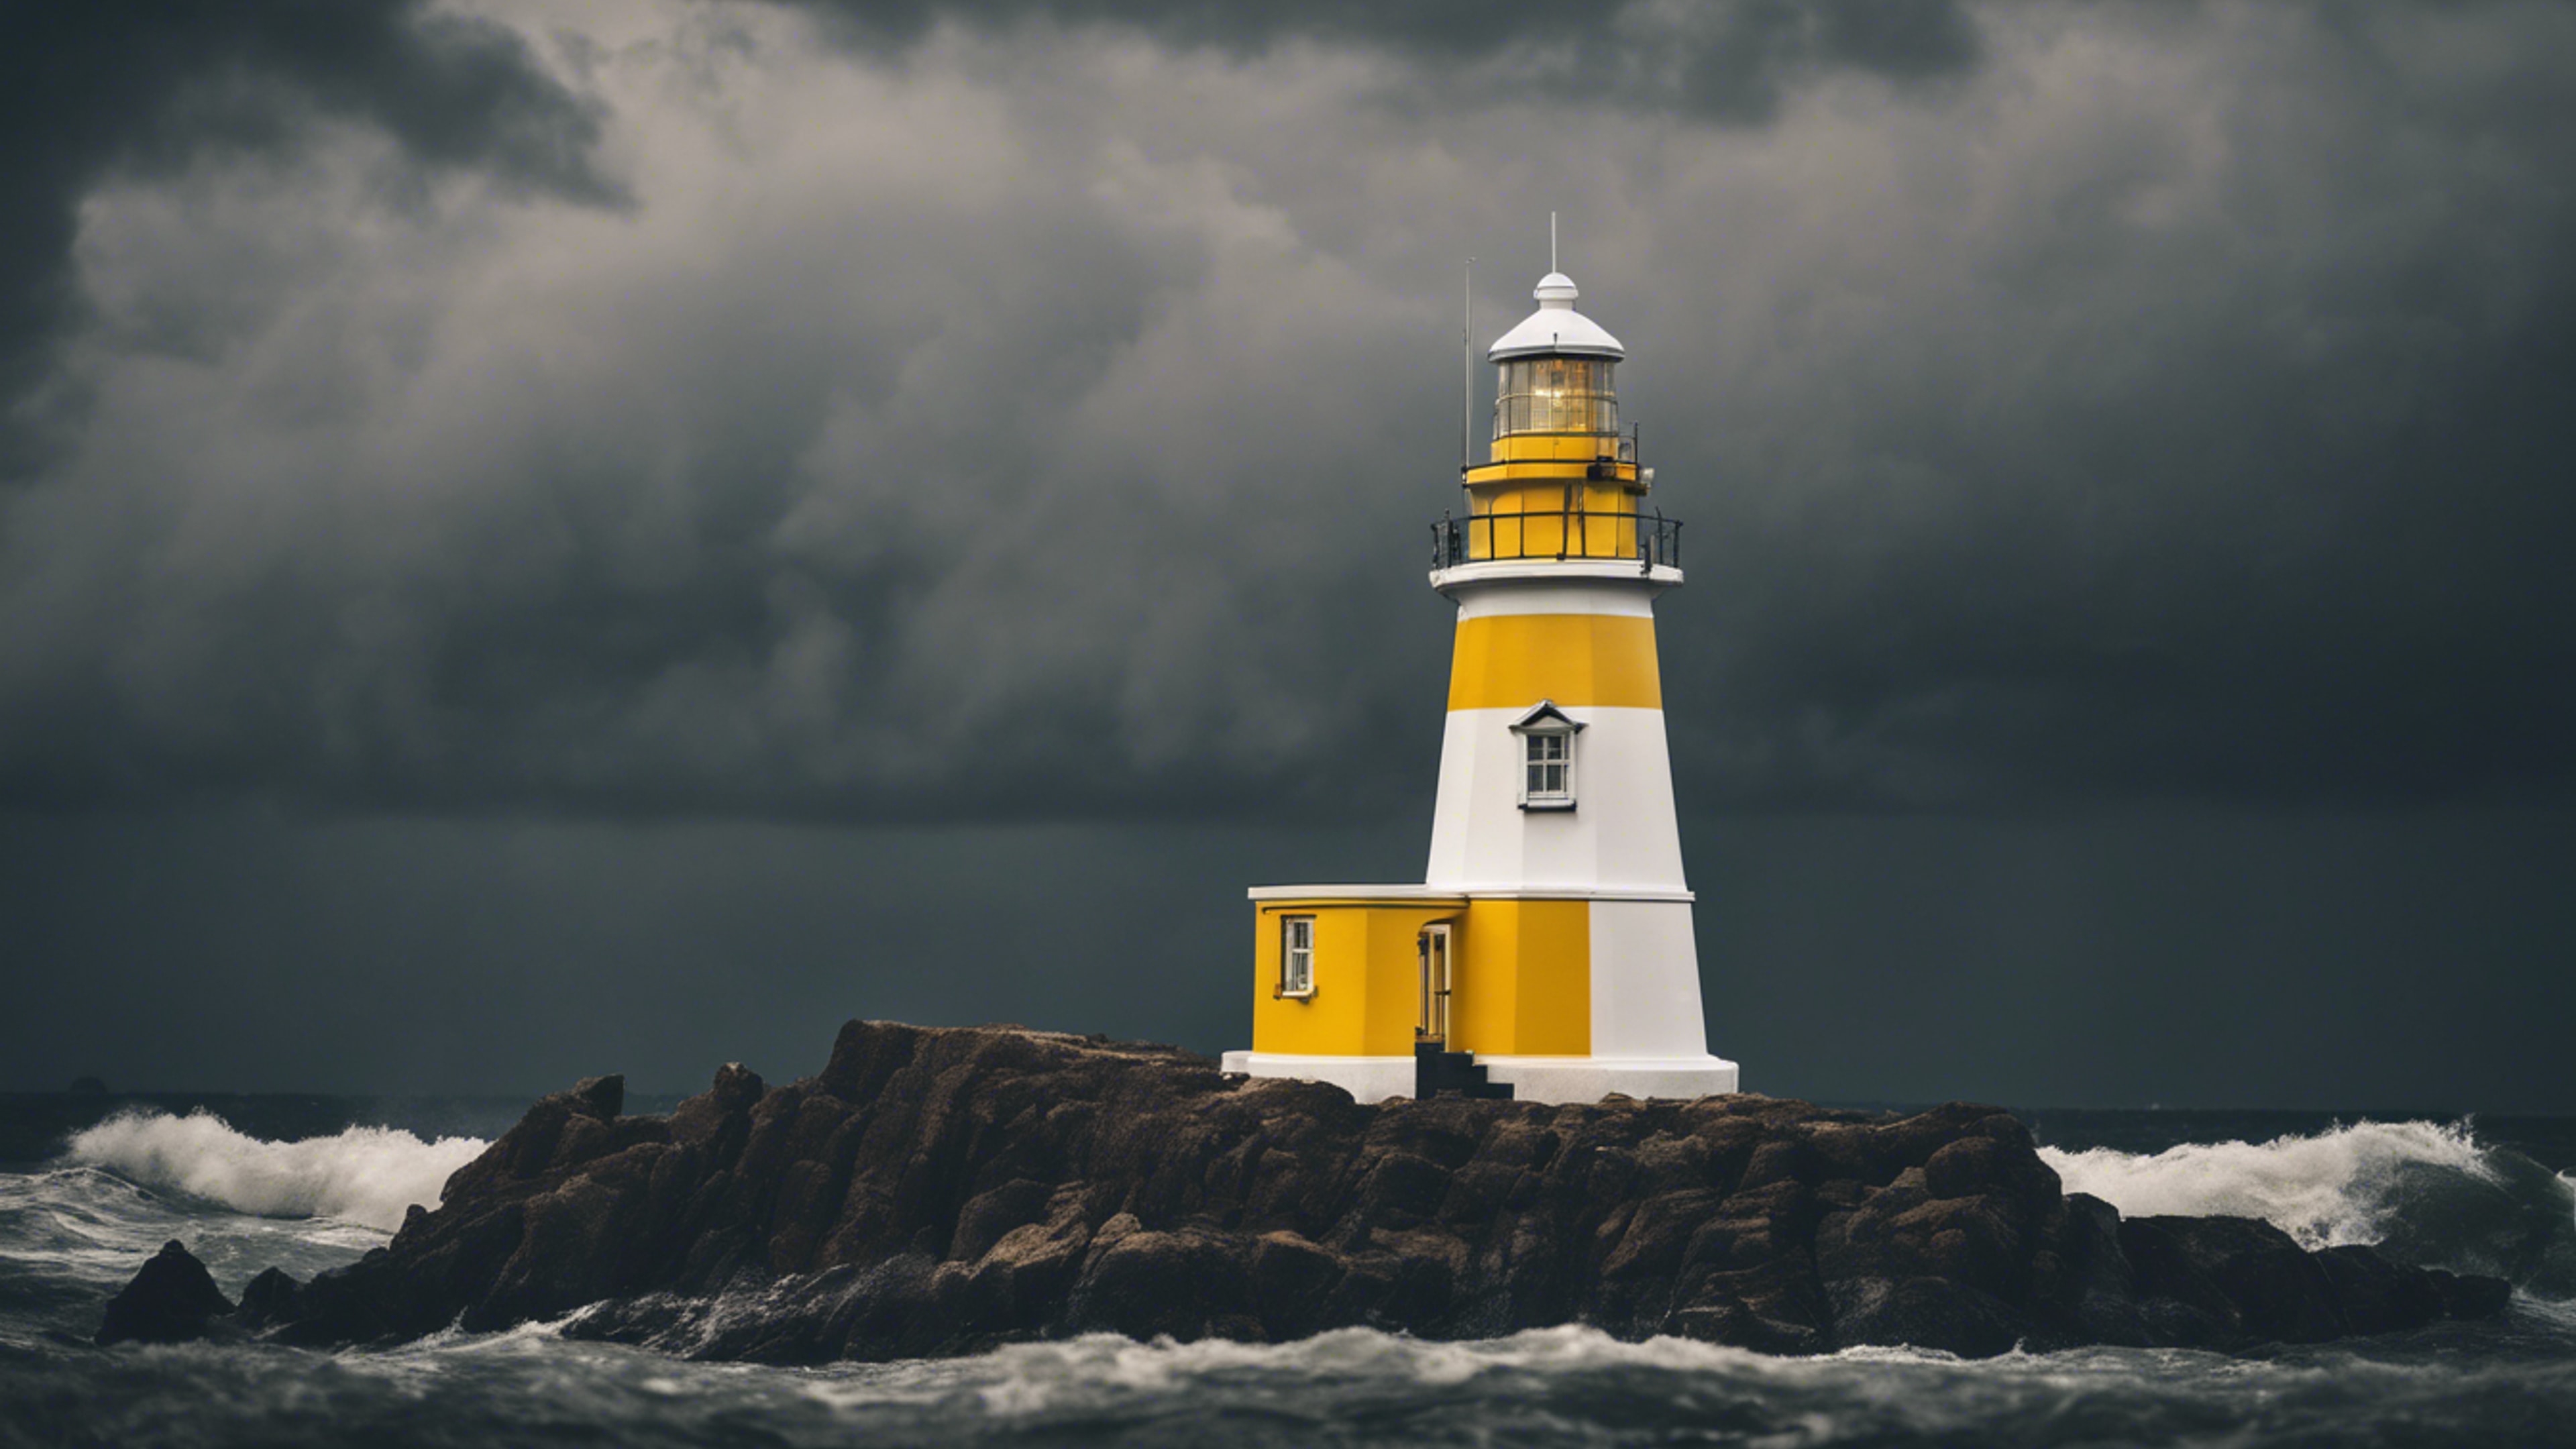 A white and yellow striped lighthouse standing tall against a stormy dark sky. Wallpaper[29fc73b96f634852baf9]